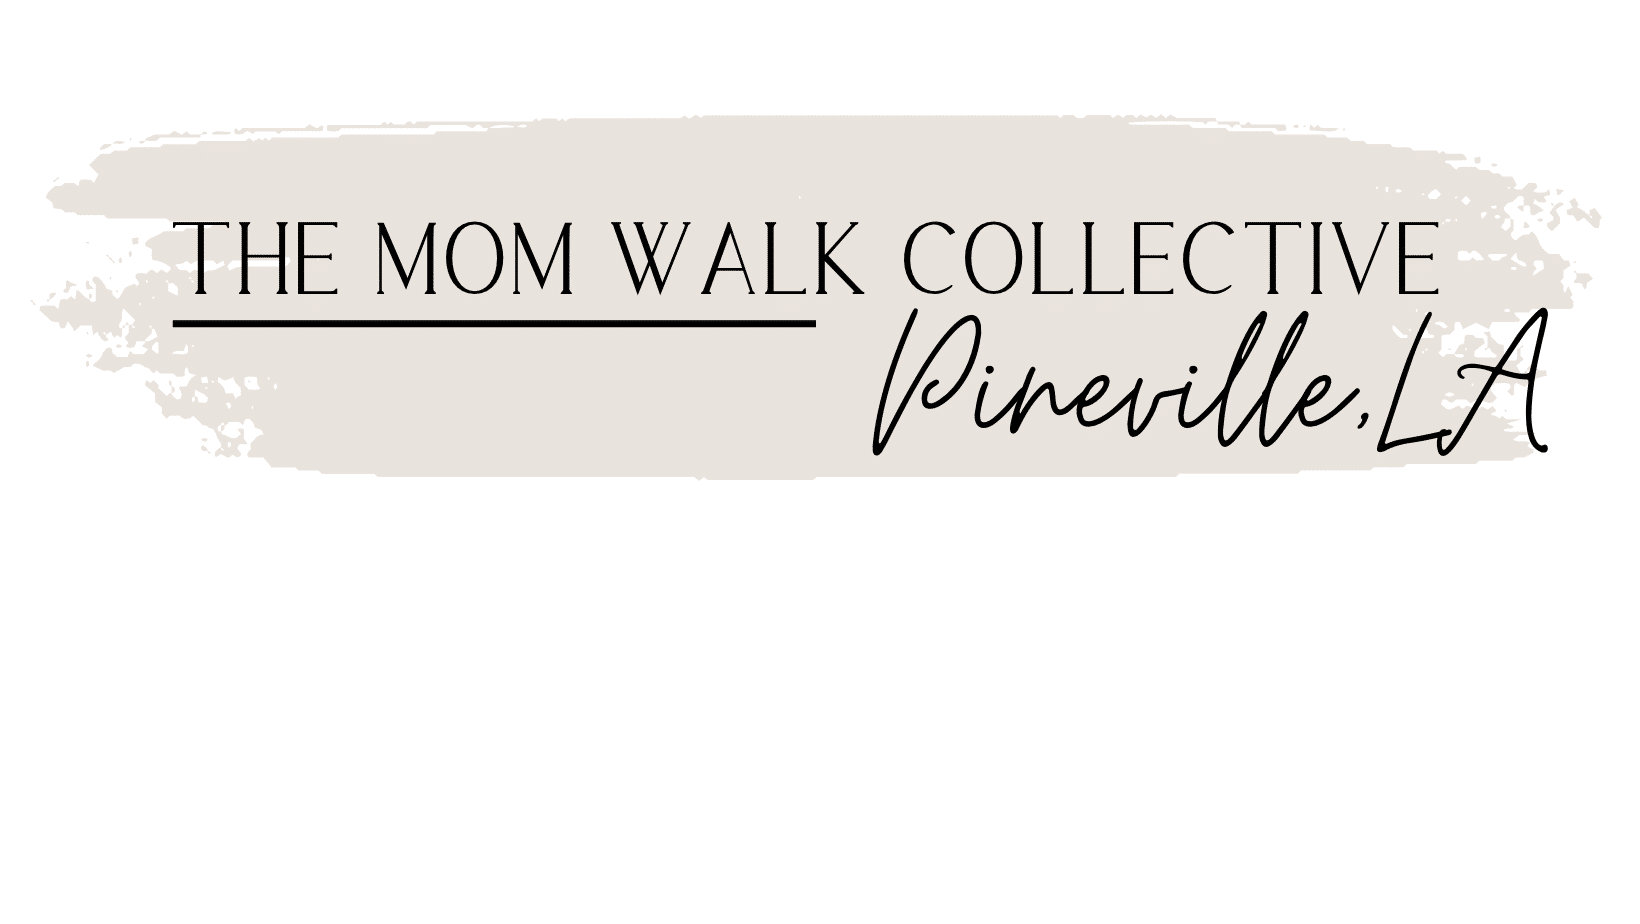 The Mom Walk Collective - Pineville: August Walk #1